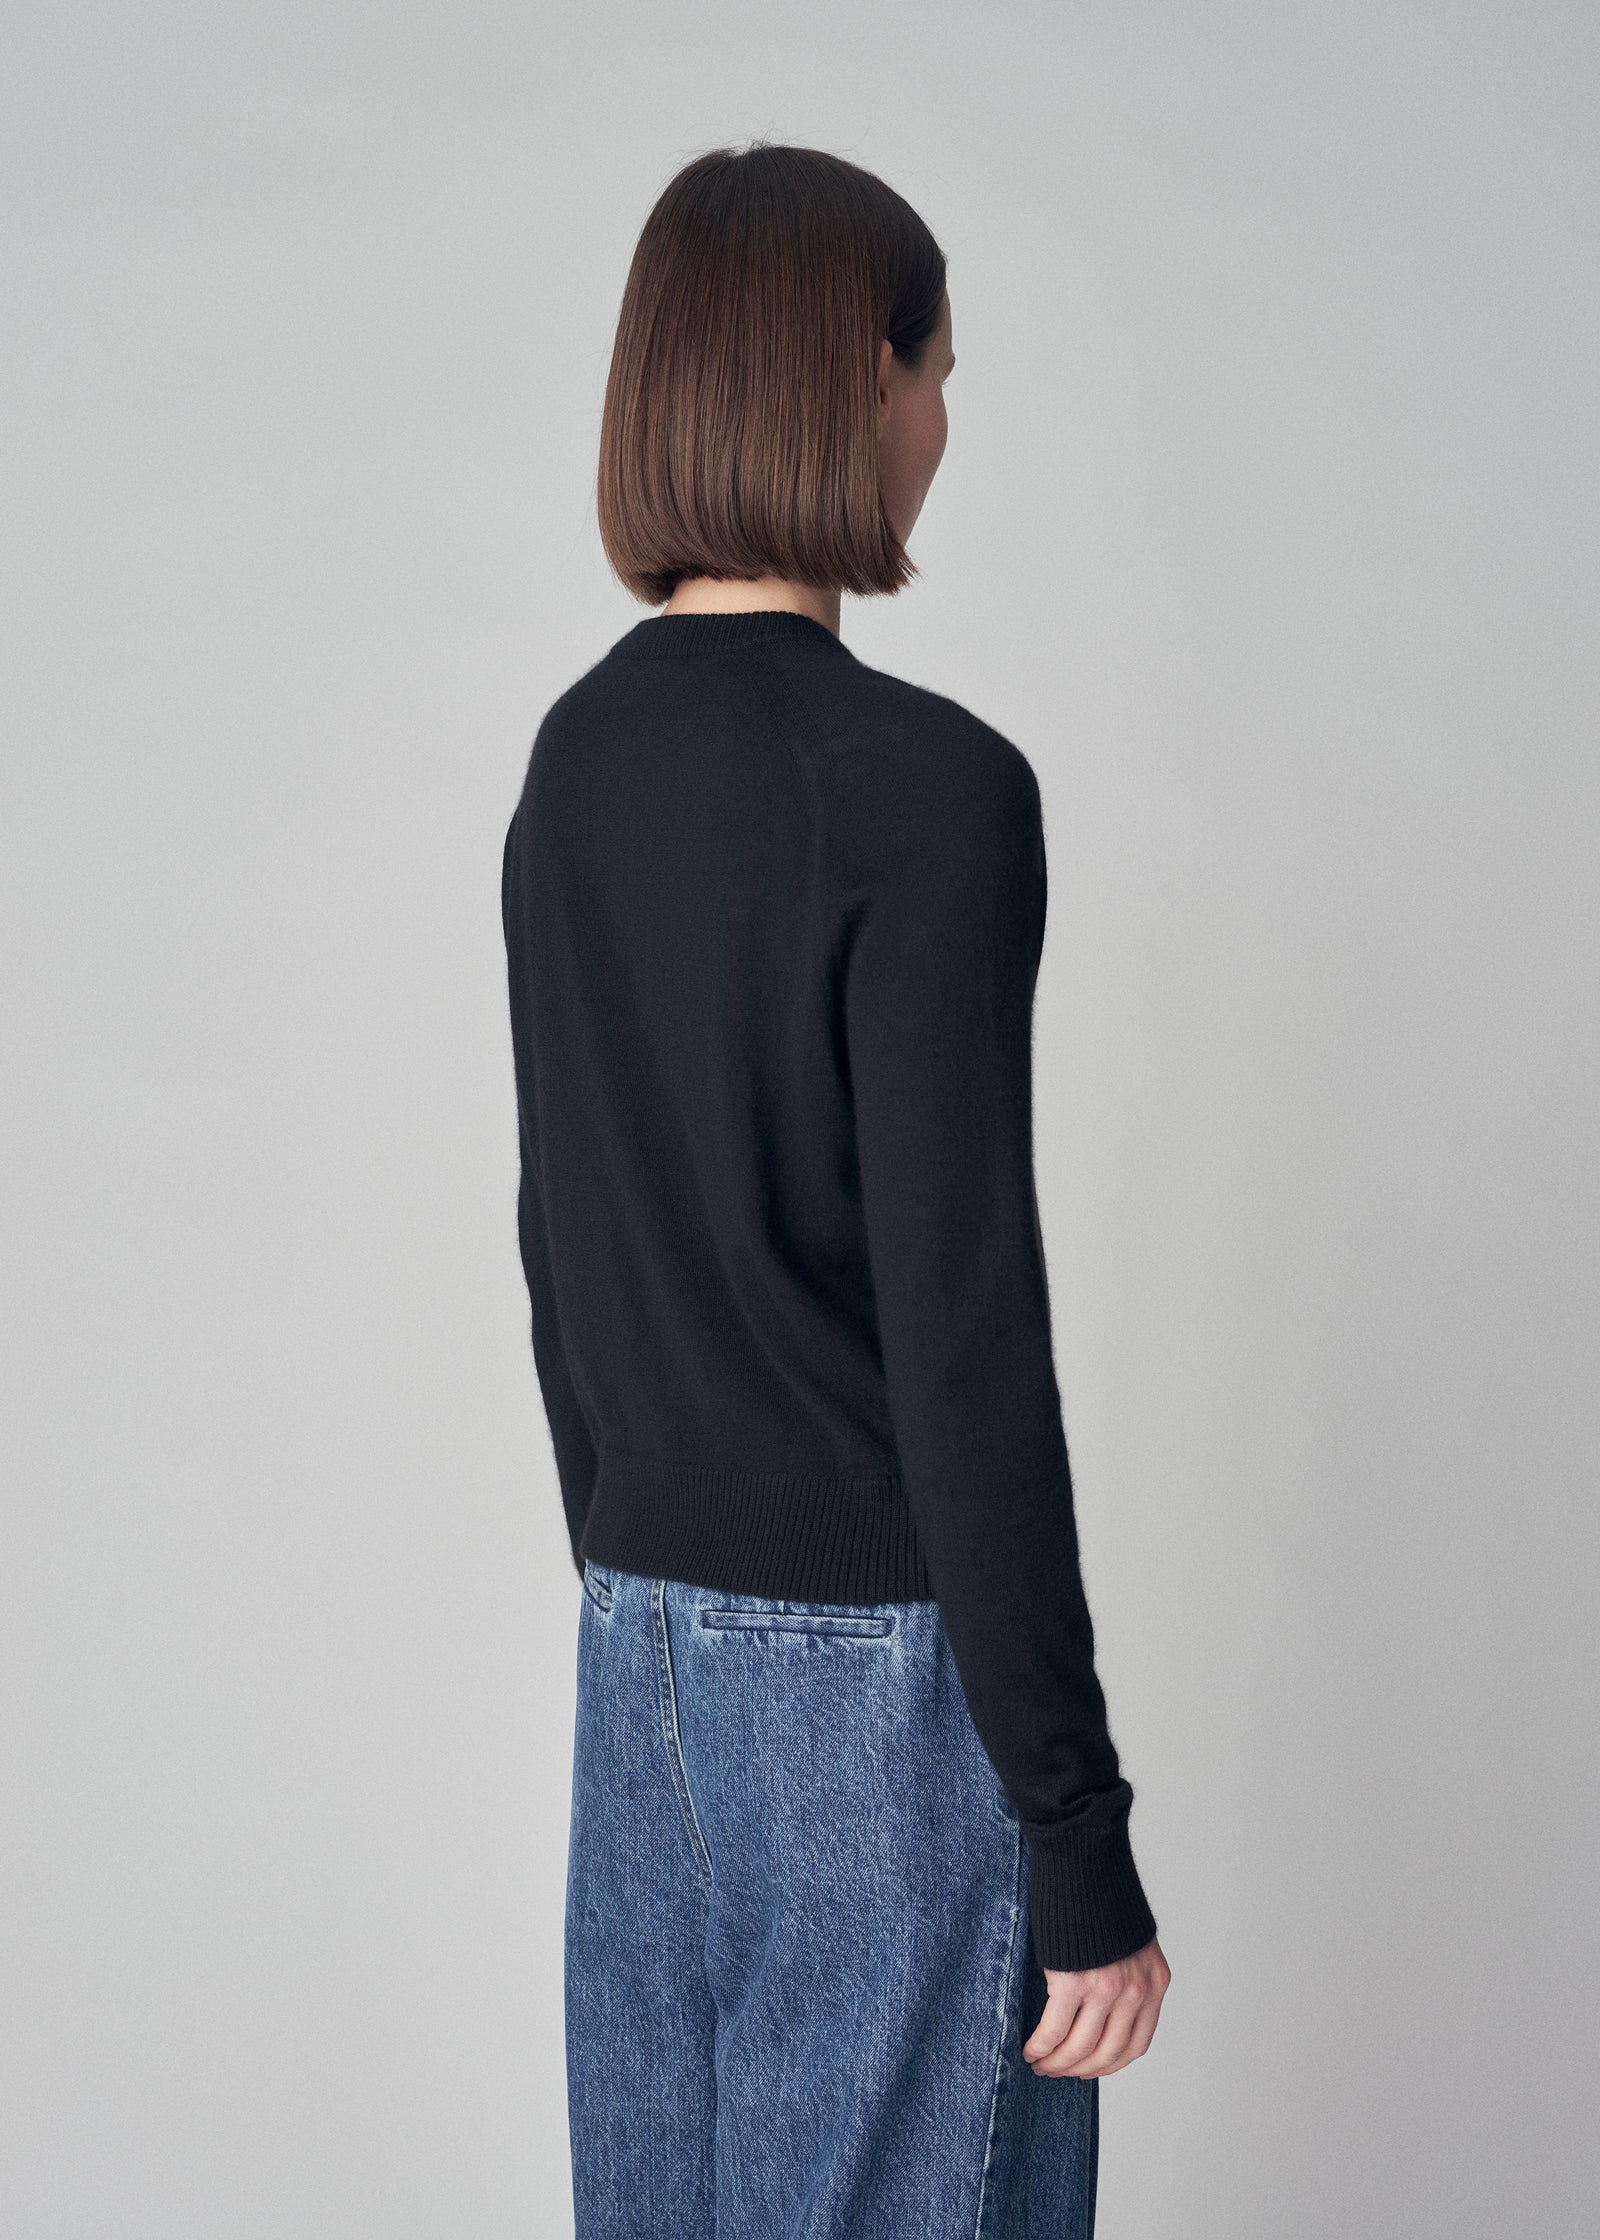 Waist Length Cardigan in Fine Cashmere  - Black - CO Collections